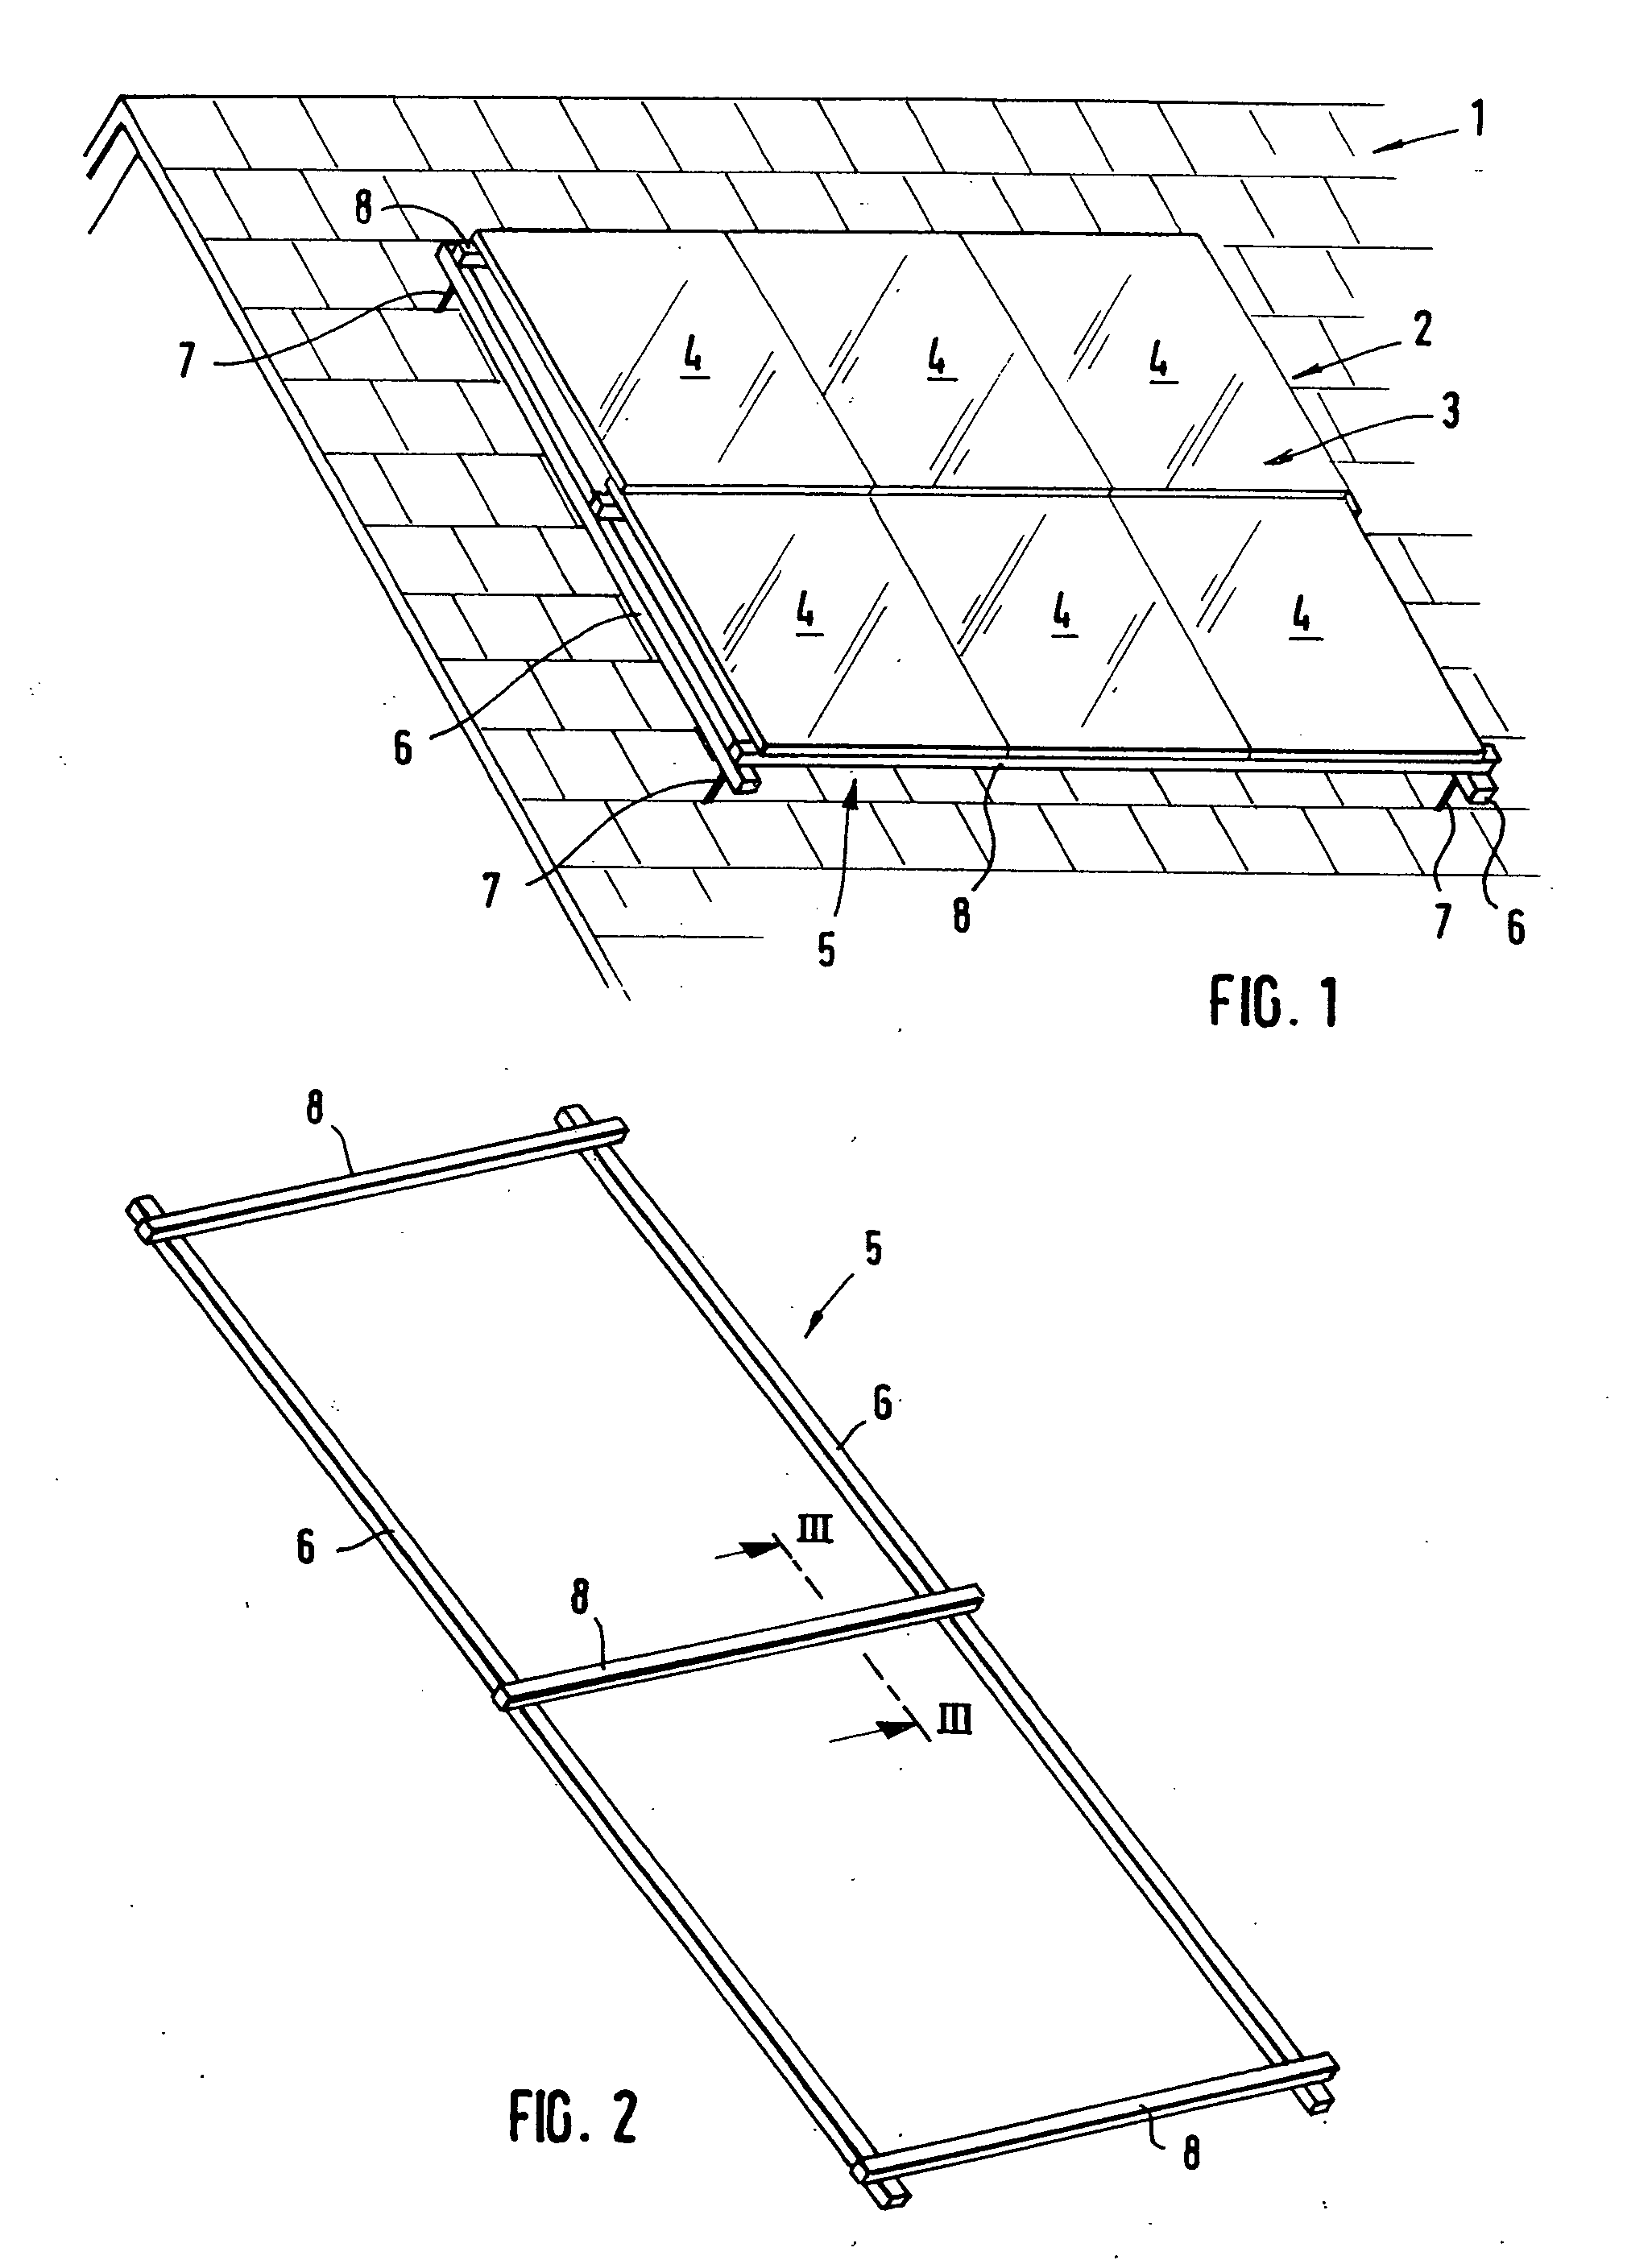 Fastening device for flat components, especially solar modules, to be arranged on a framework